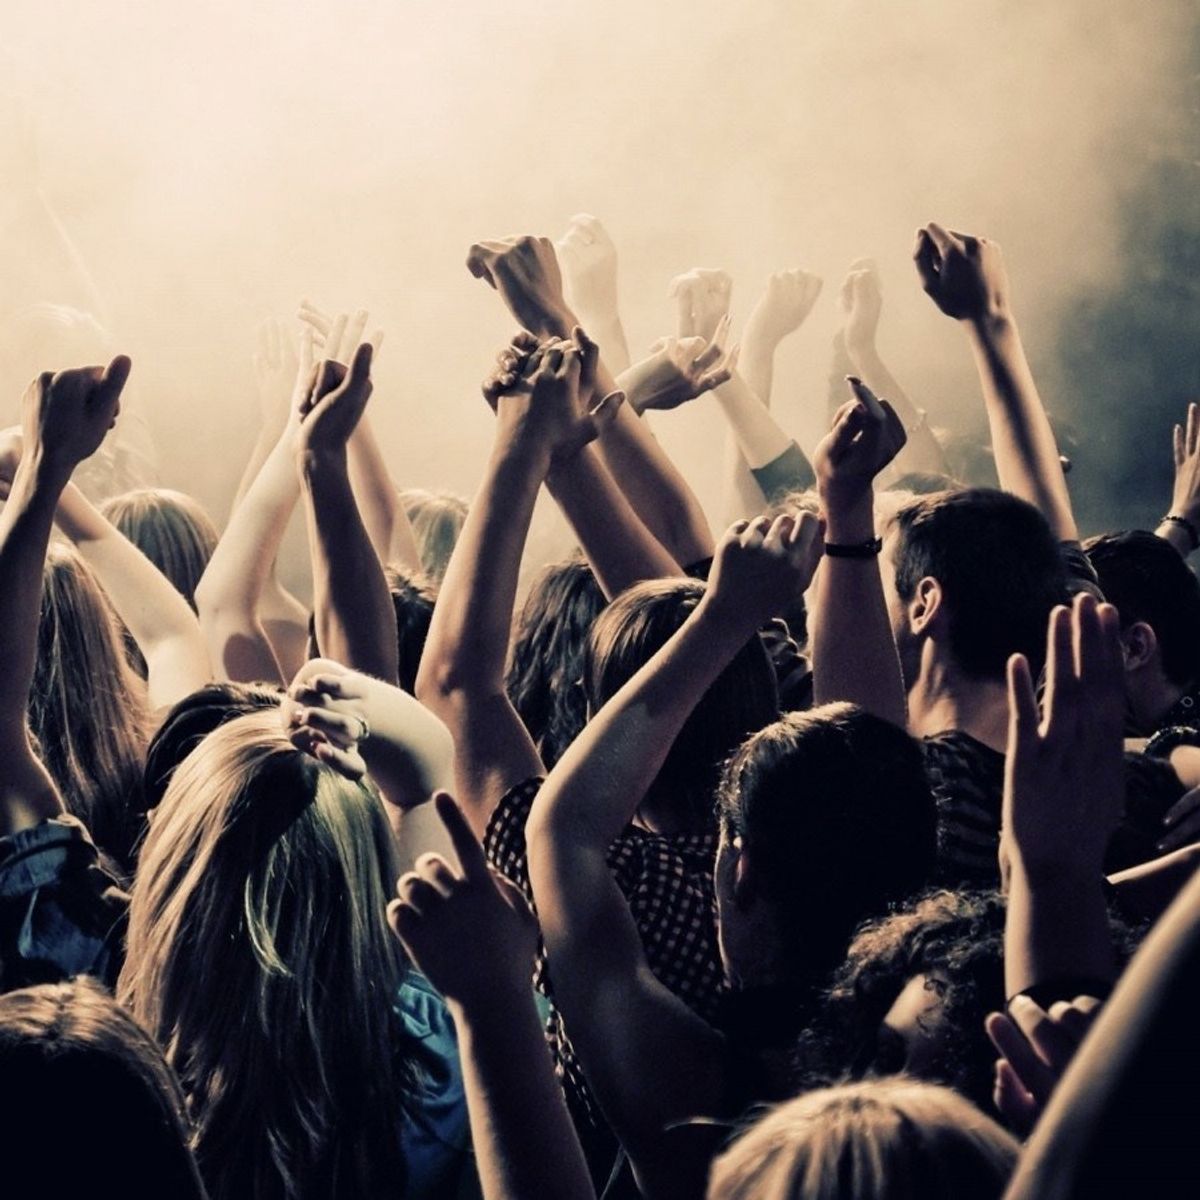 Top 15 Songs You Are Guaranteed To Hear At Any Ohio University Party Or Bar